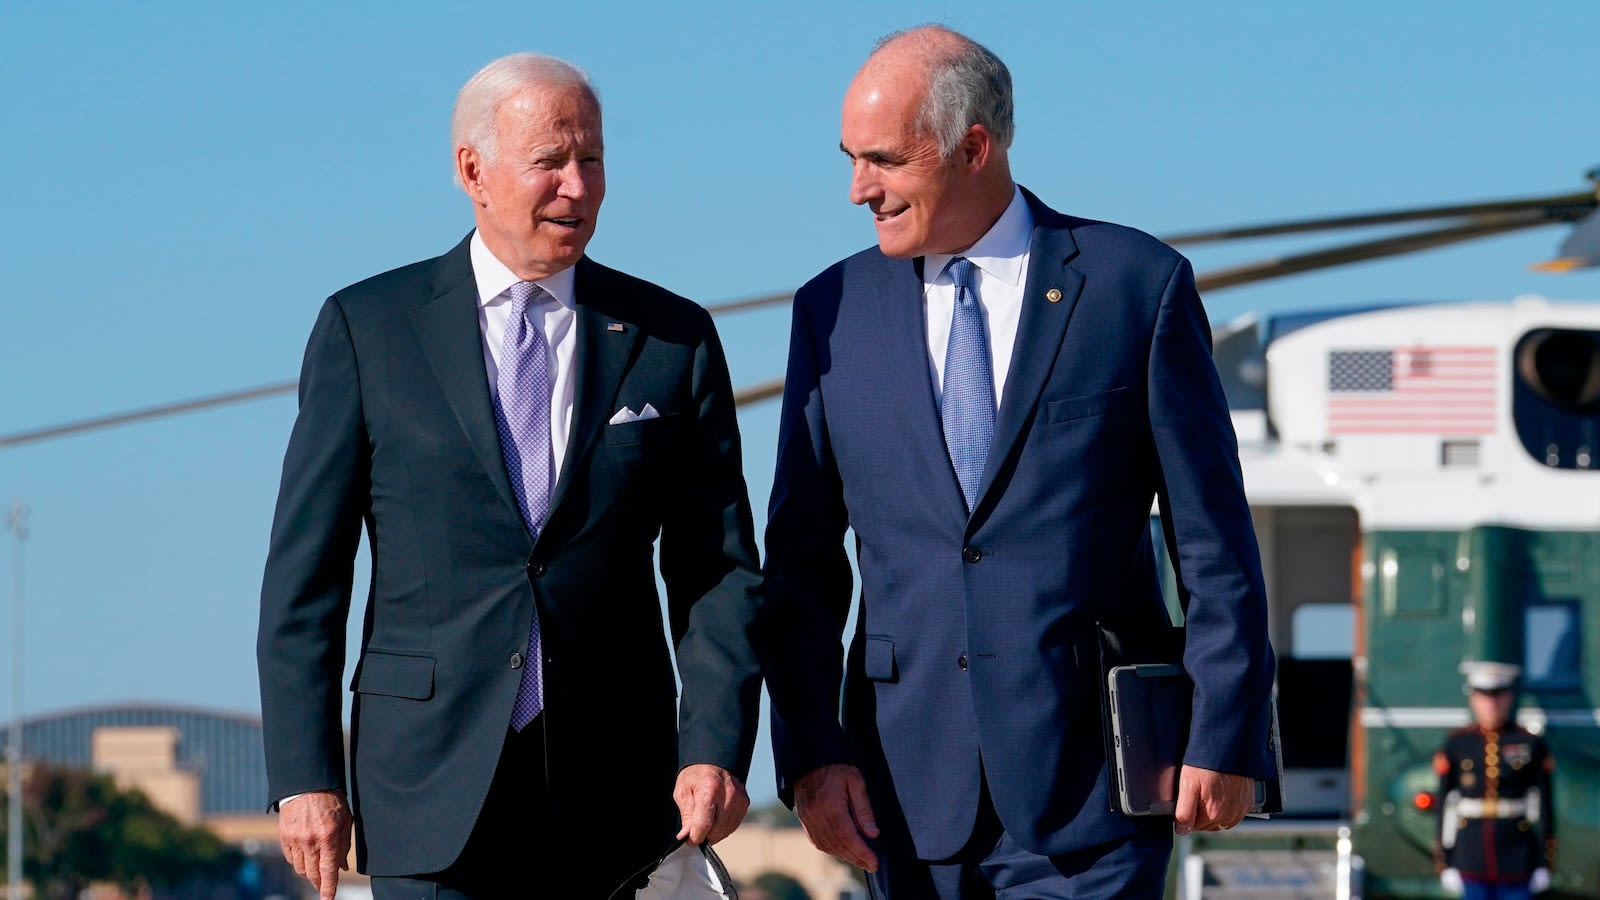 Senate Democrats are polling well. That could help Biden.